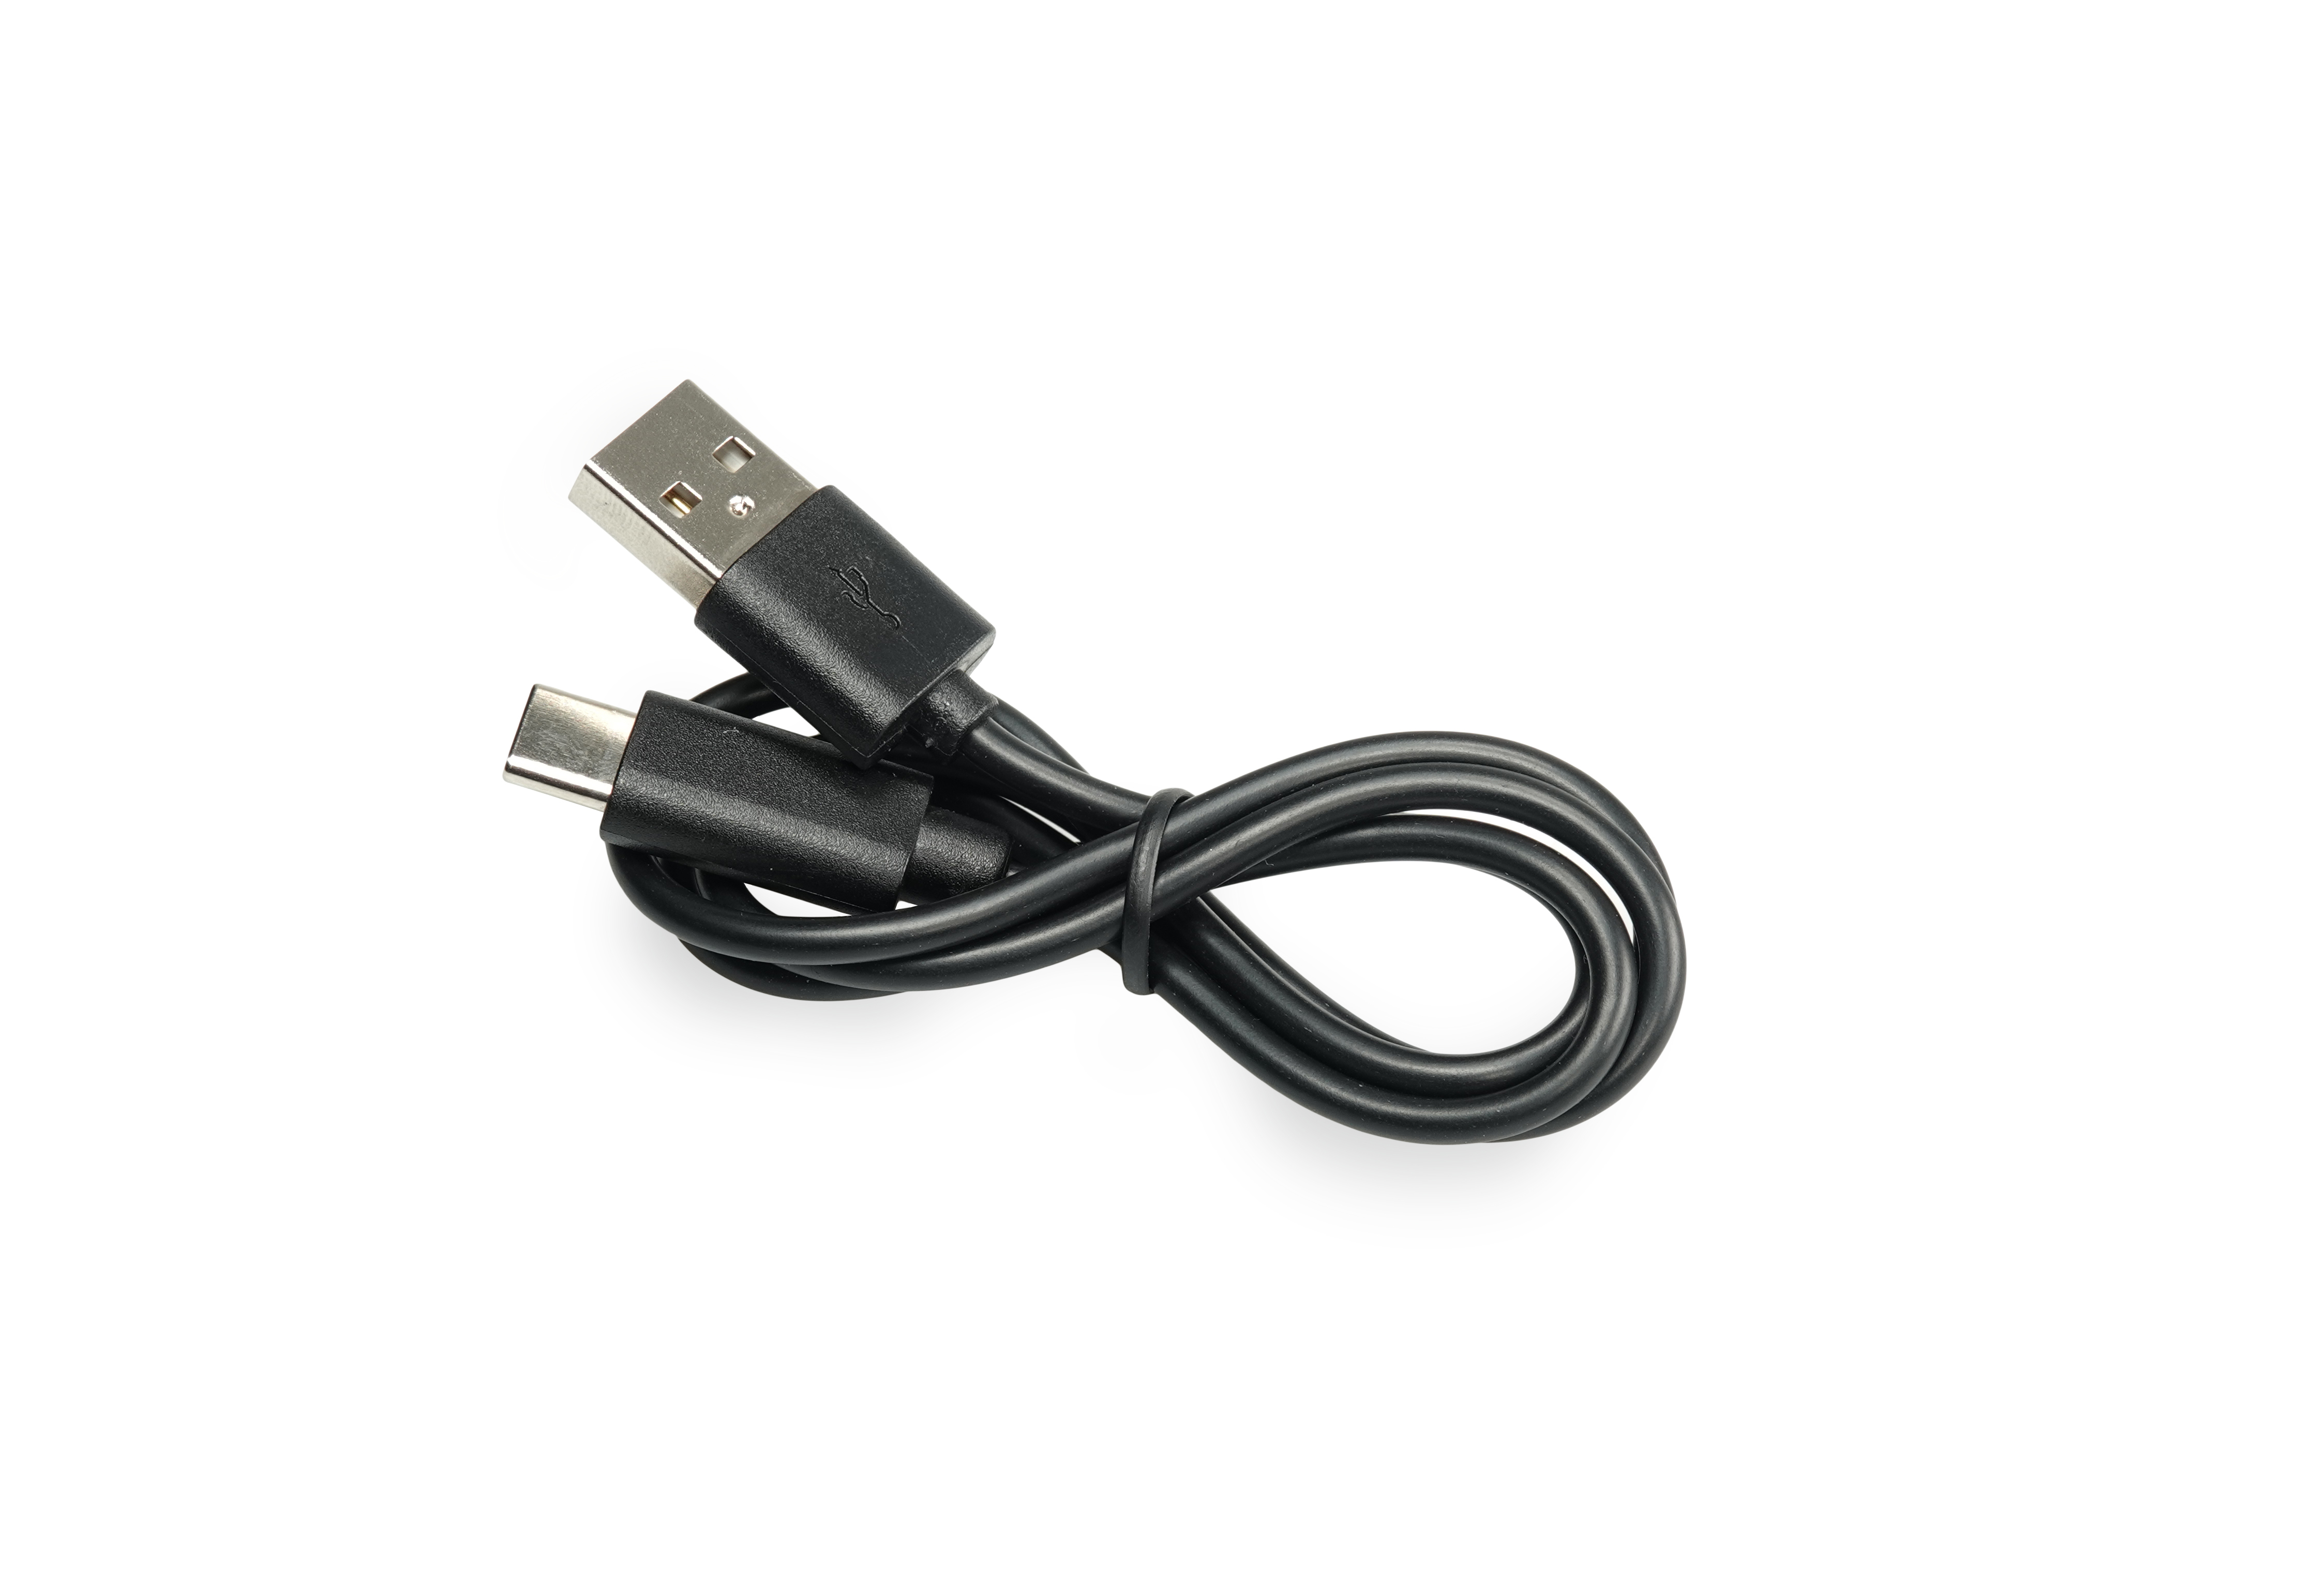 USB-C charging cable